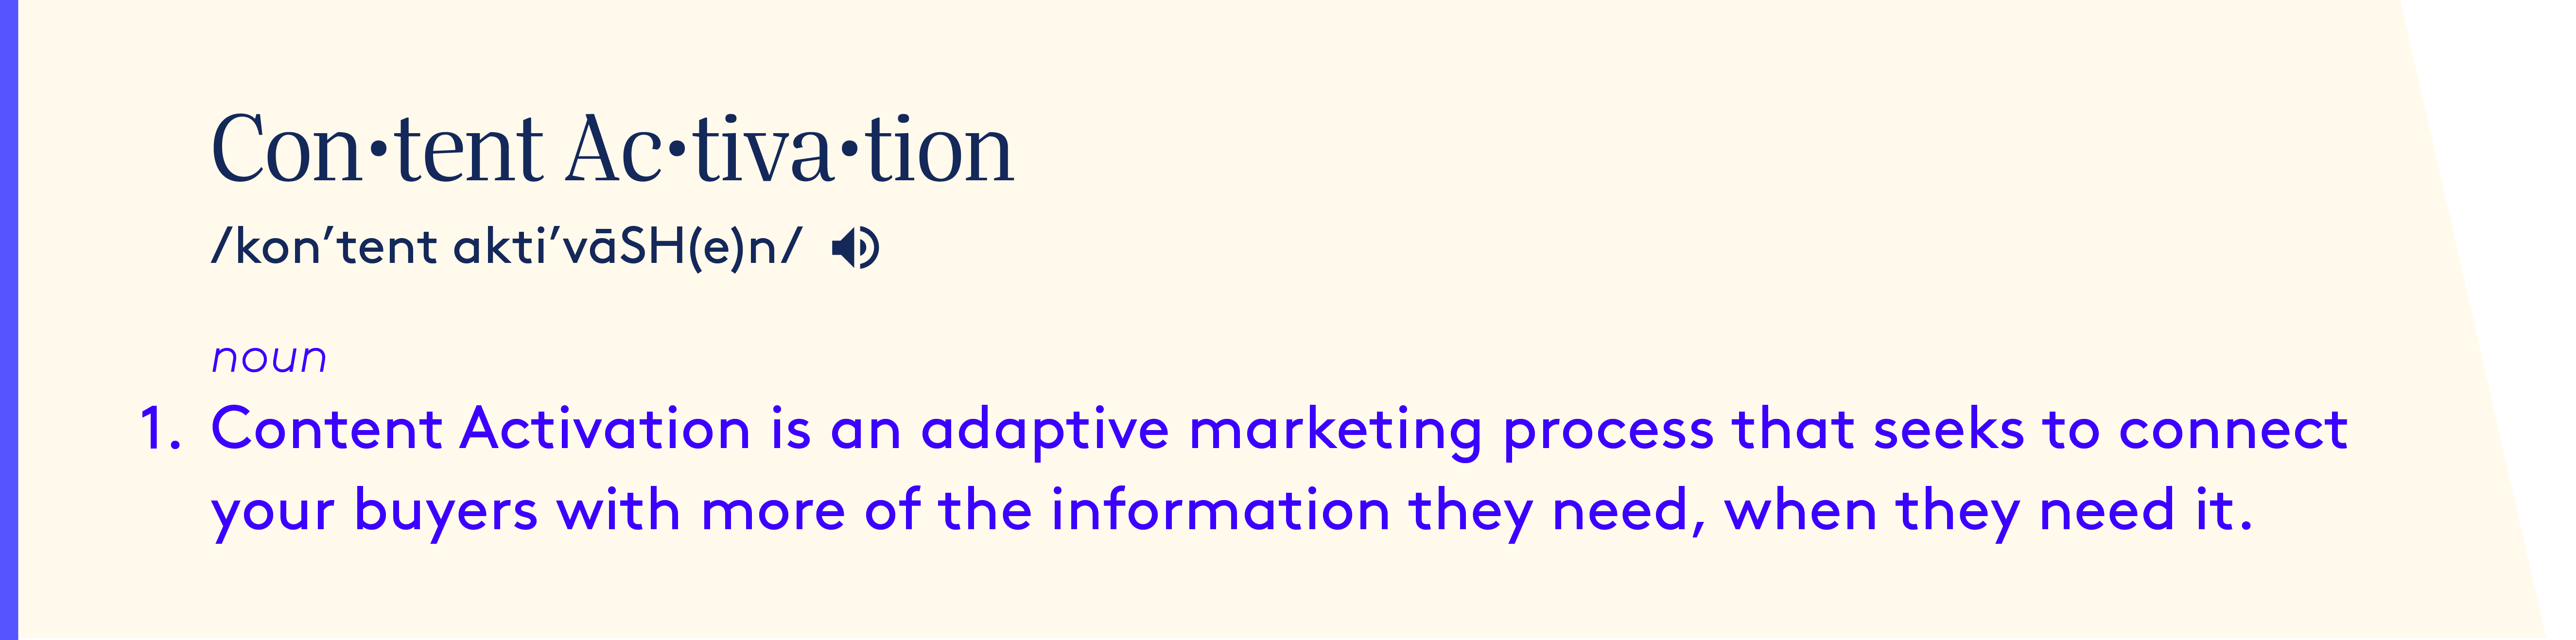 Content Activation definition - noun.  Content Activation is an adaptive marketing process that seeks to connect your buyers with more of the information they need, when they need it.